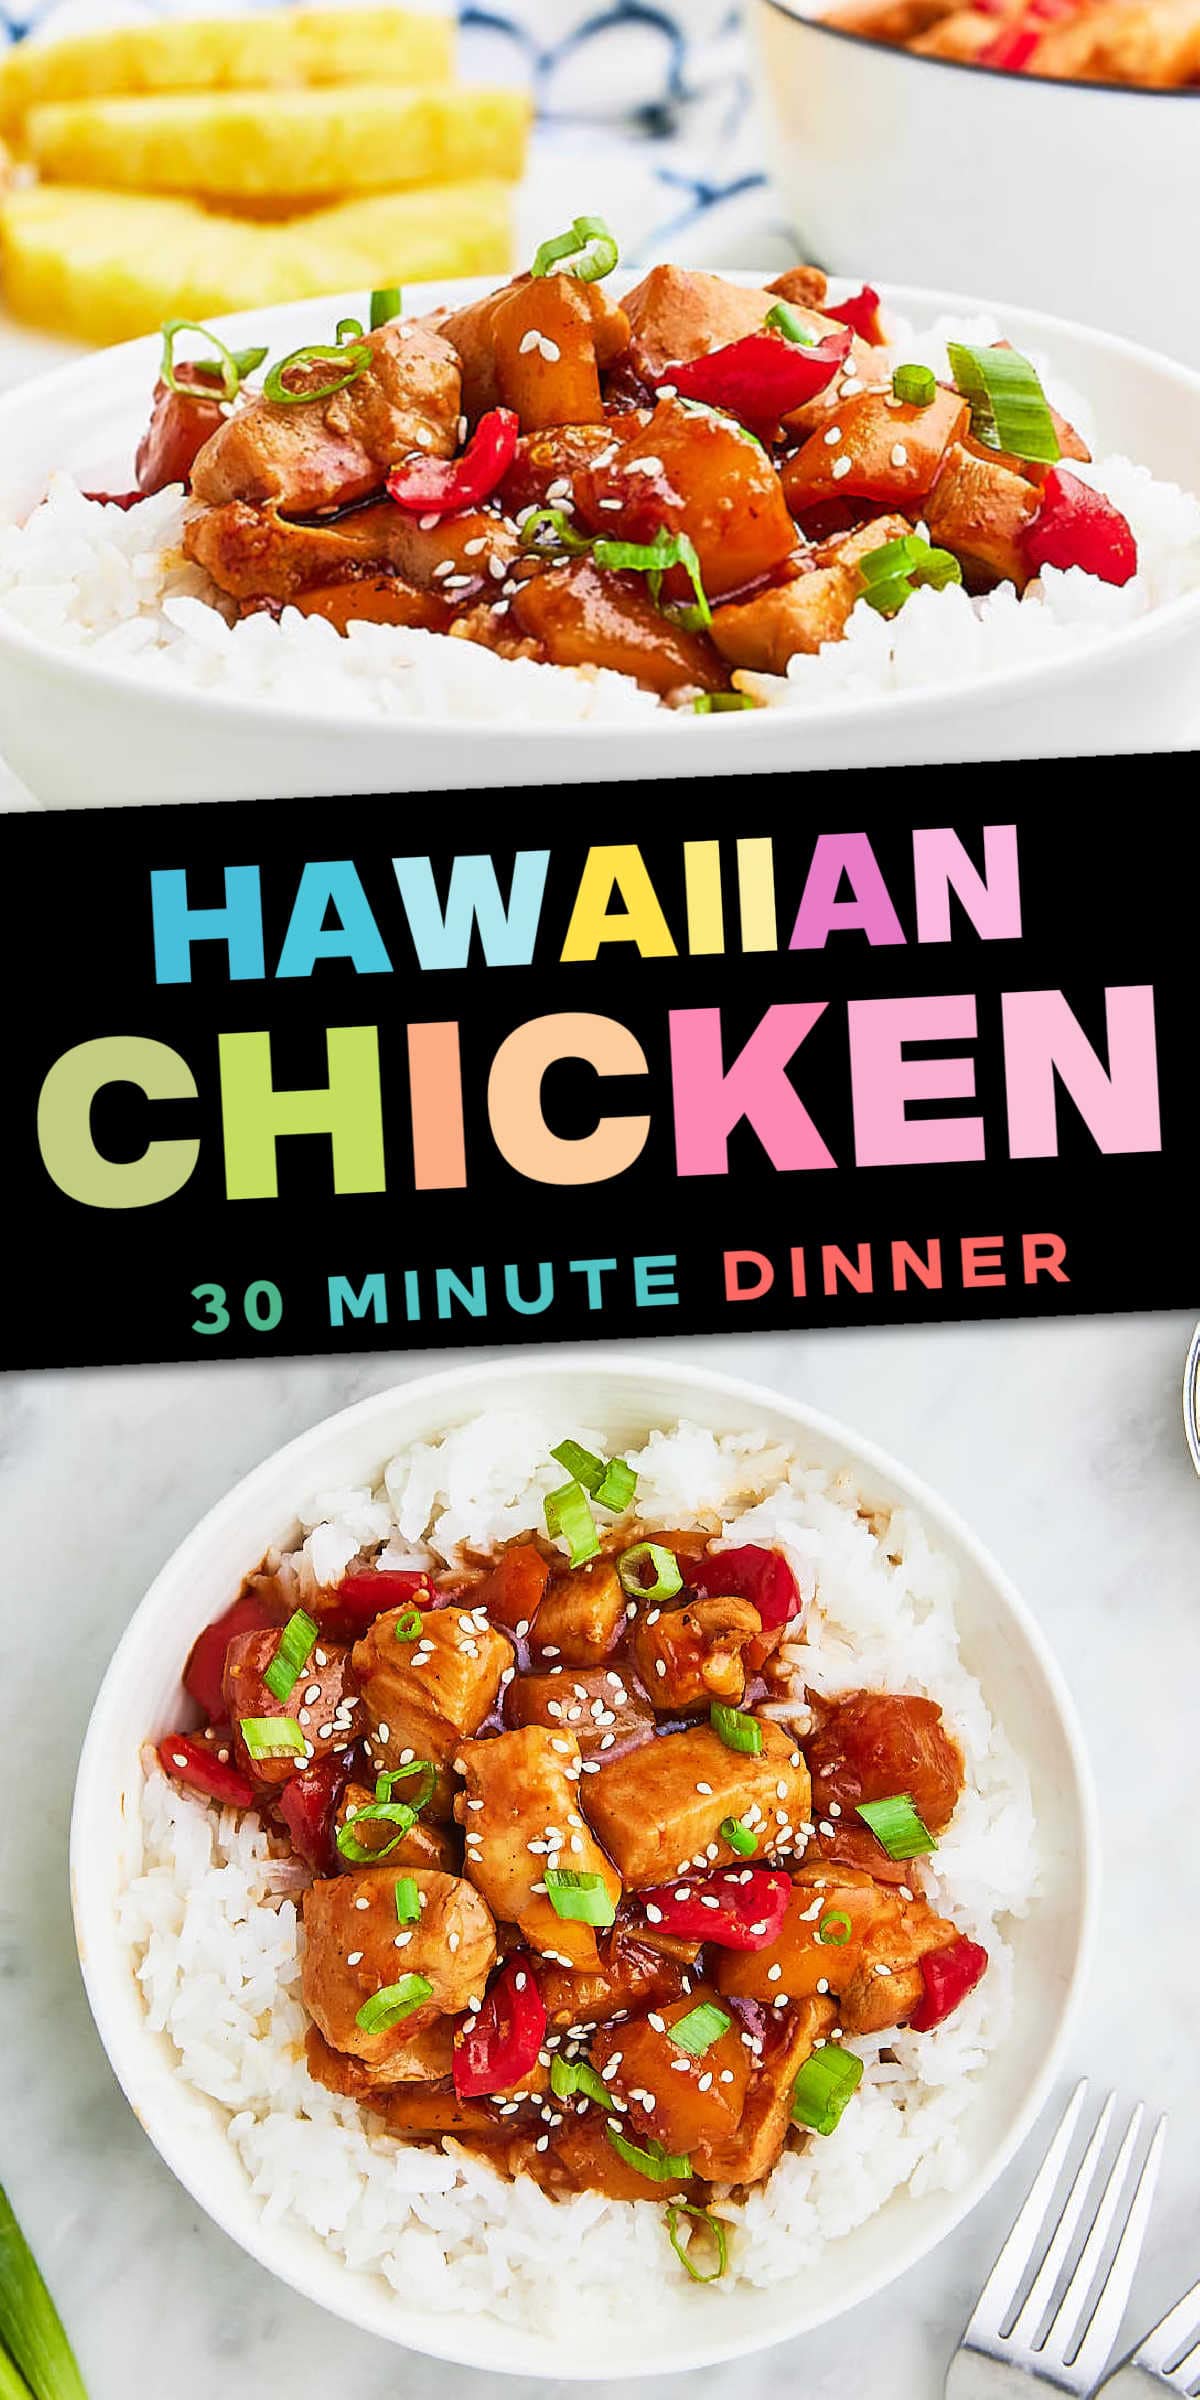 Dinner gets a tropical twist with this Hawaiian Chicken recipe. Juicy chicken, sweet pineapple, and a zingy sauce come together for a delightful meal that's easy to whip up in your own kitchen. #cheerfulcook #Hawaiianchicken #chickendinner #weeknightdinner #easydinner #chickenrecipes via @cheerfulcook